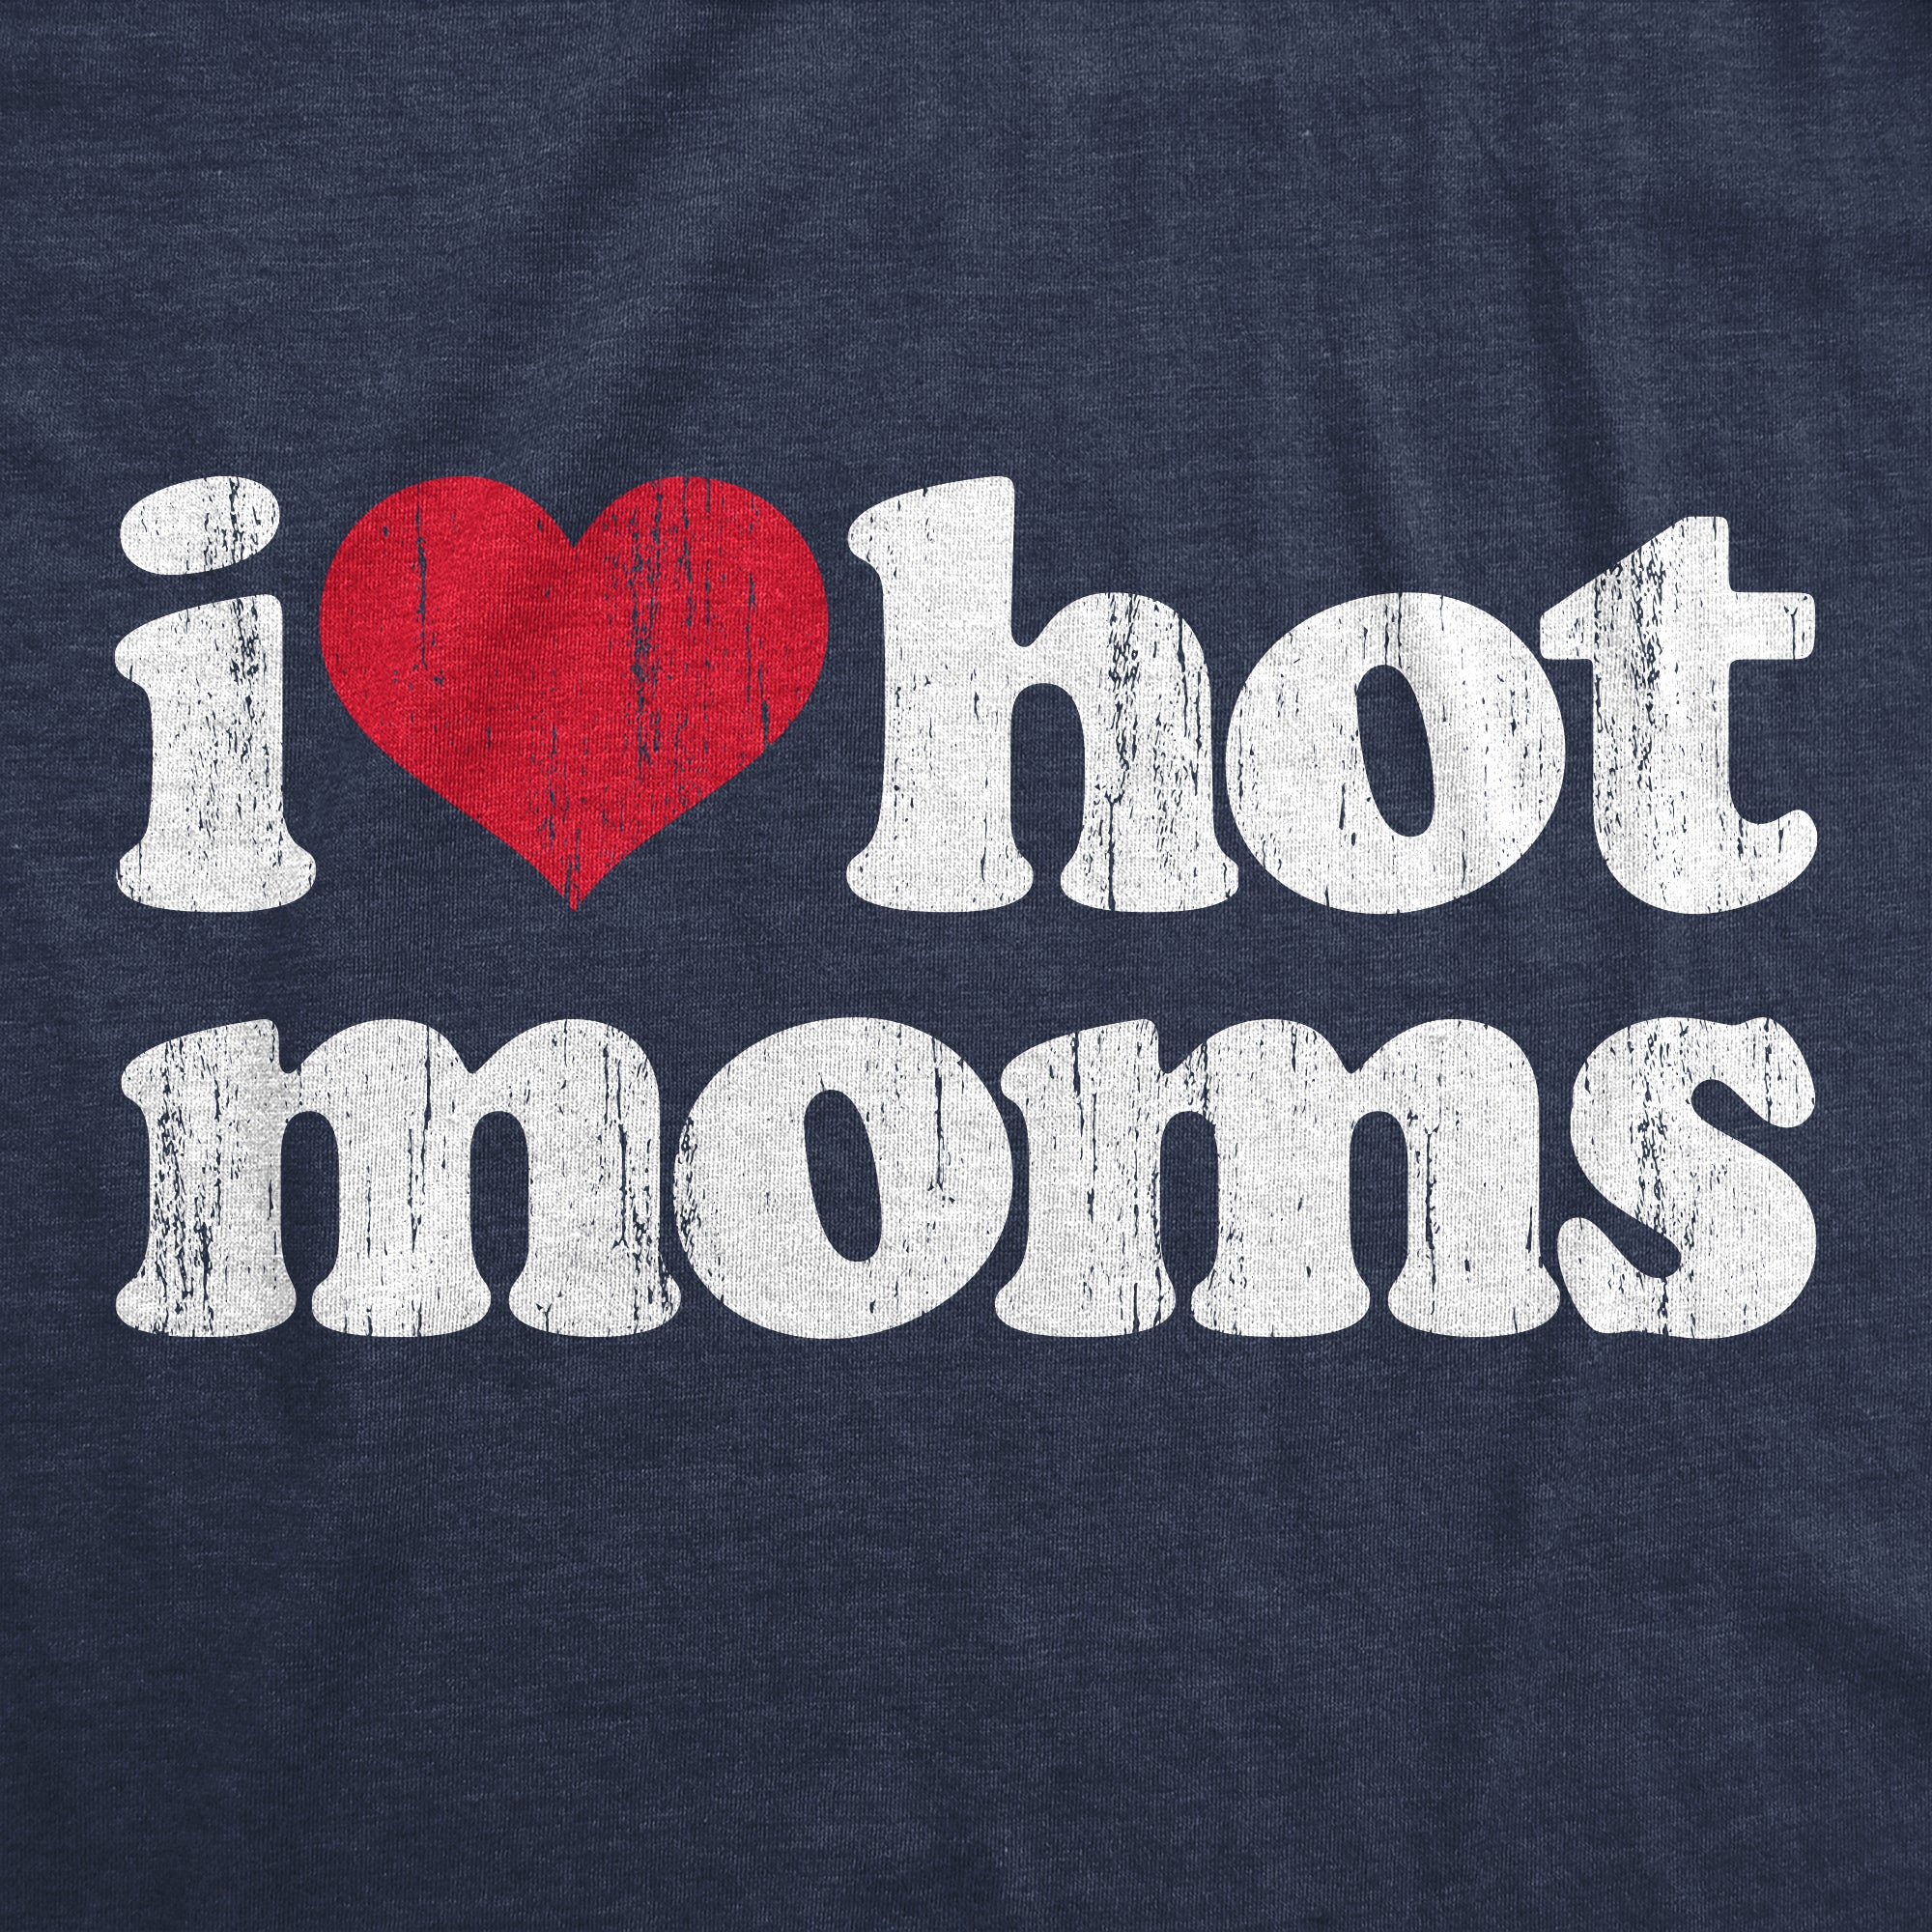 Funny Heather Navy I Heart Hot Moms Womens T Shirt Nerdy Mother's Day Sarcastic Tee